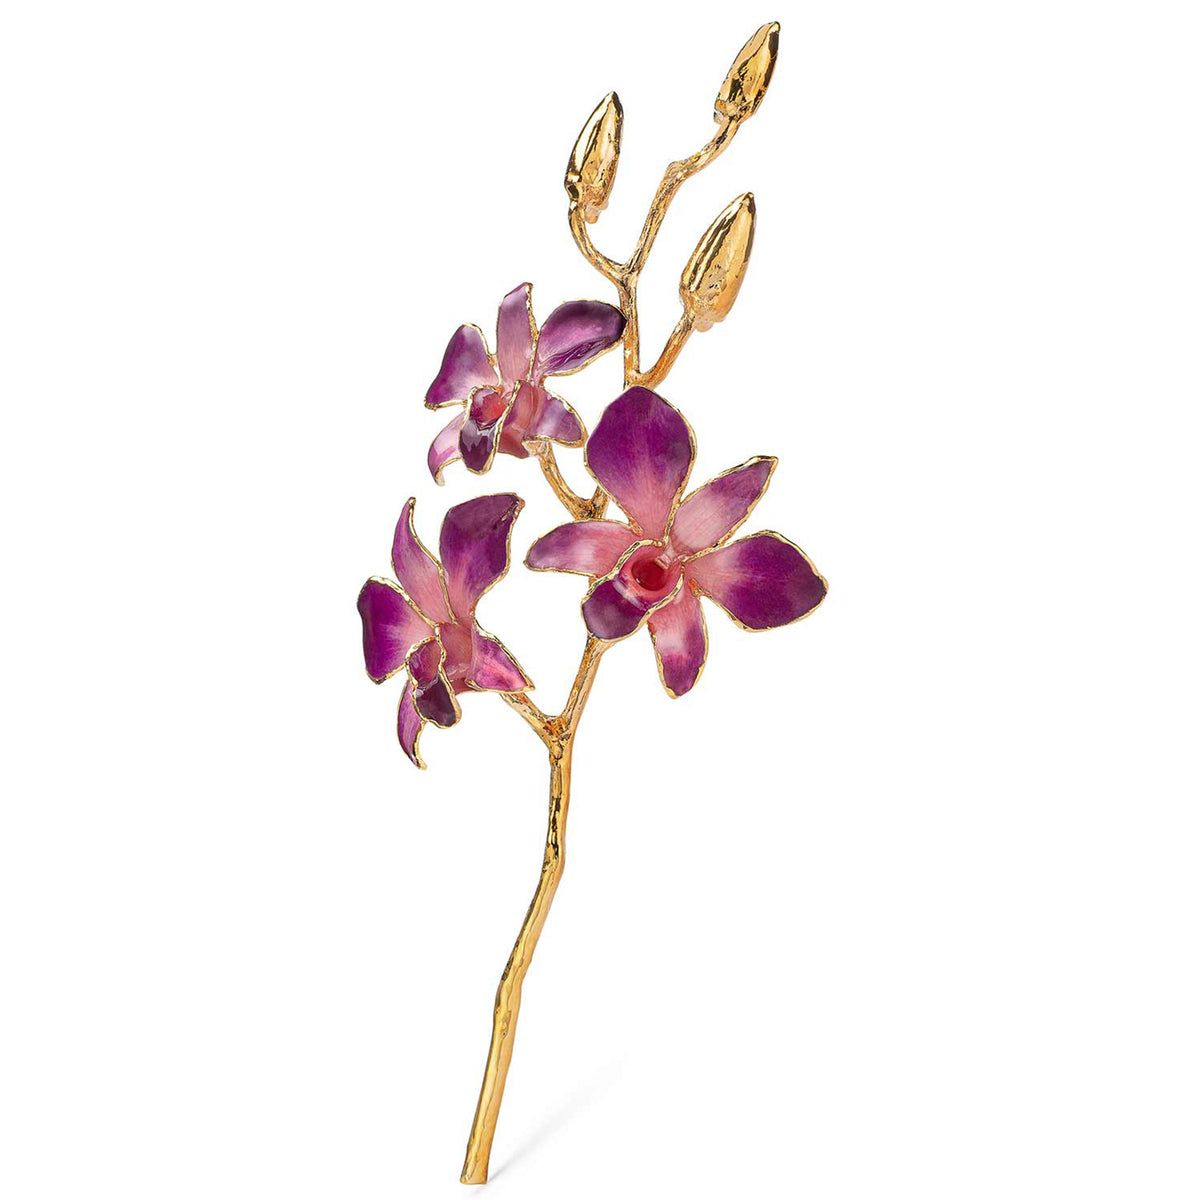 24K Gold Dipped Orchid in Lilac Pink view of gold stem and flowers